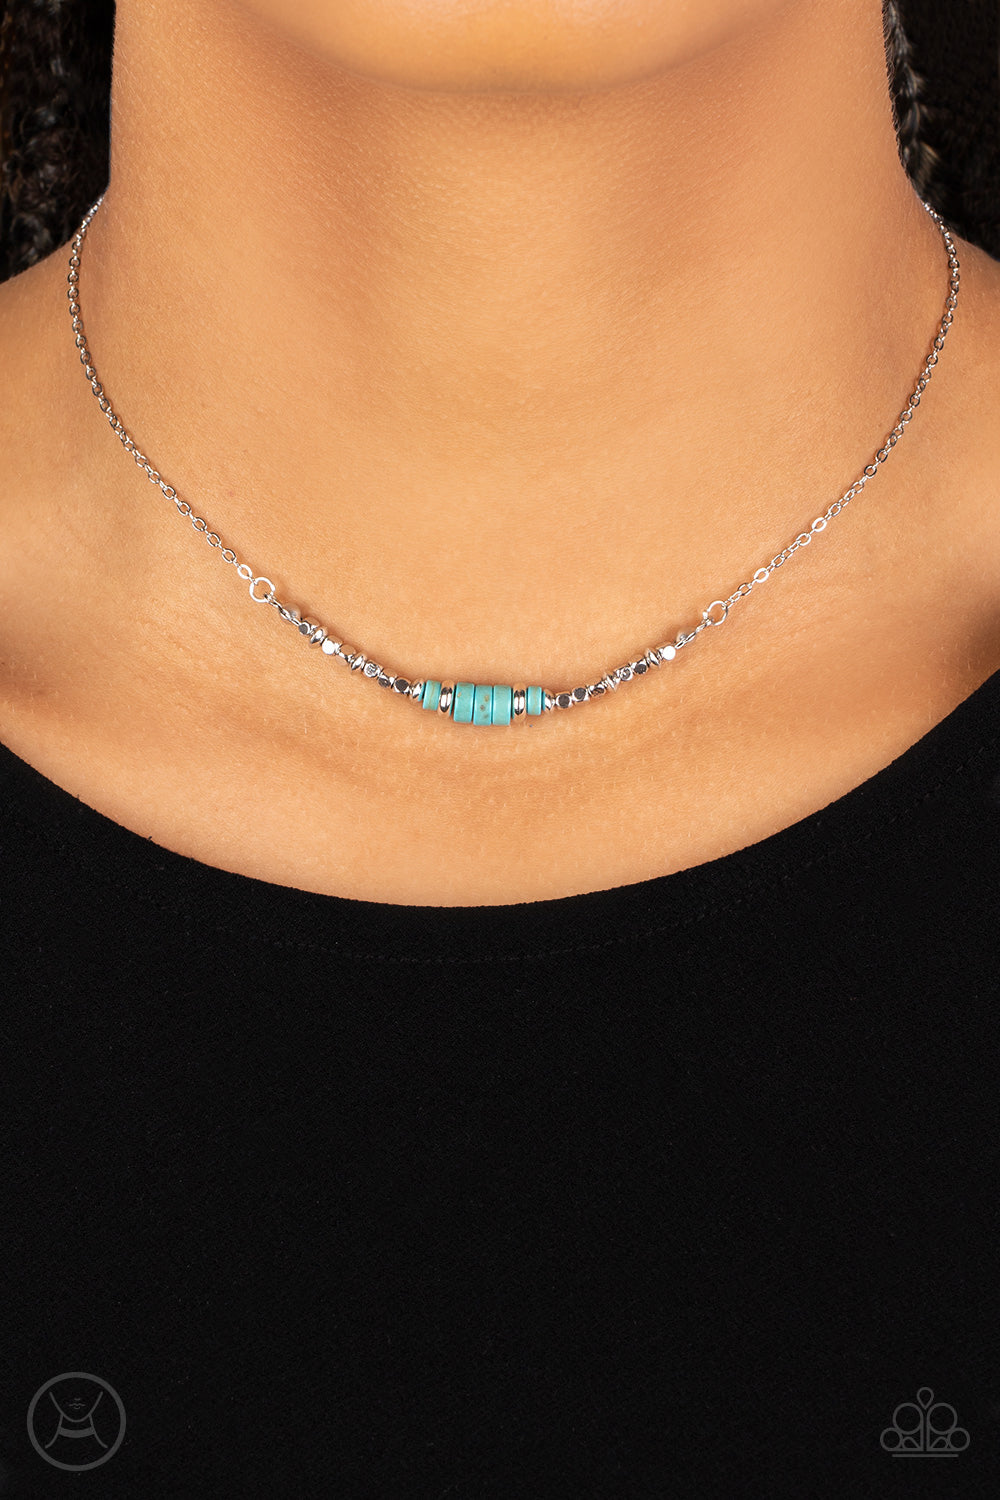 Paparazzi Accessories Retro Rejuvenation - Blue A trio of earthy turquoise stone discs is flanked by square silver beads threaded along a dainty silver chain, creating a harmonious display. Features an adjustable clasp closure. Sold as one individual chok